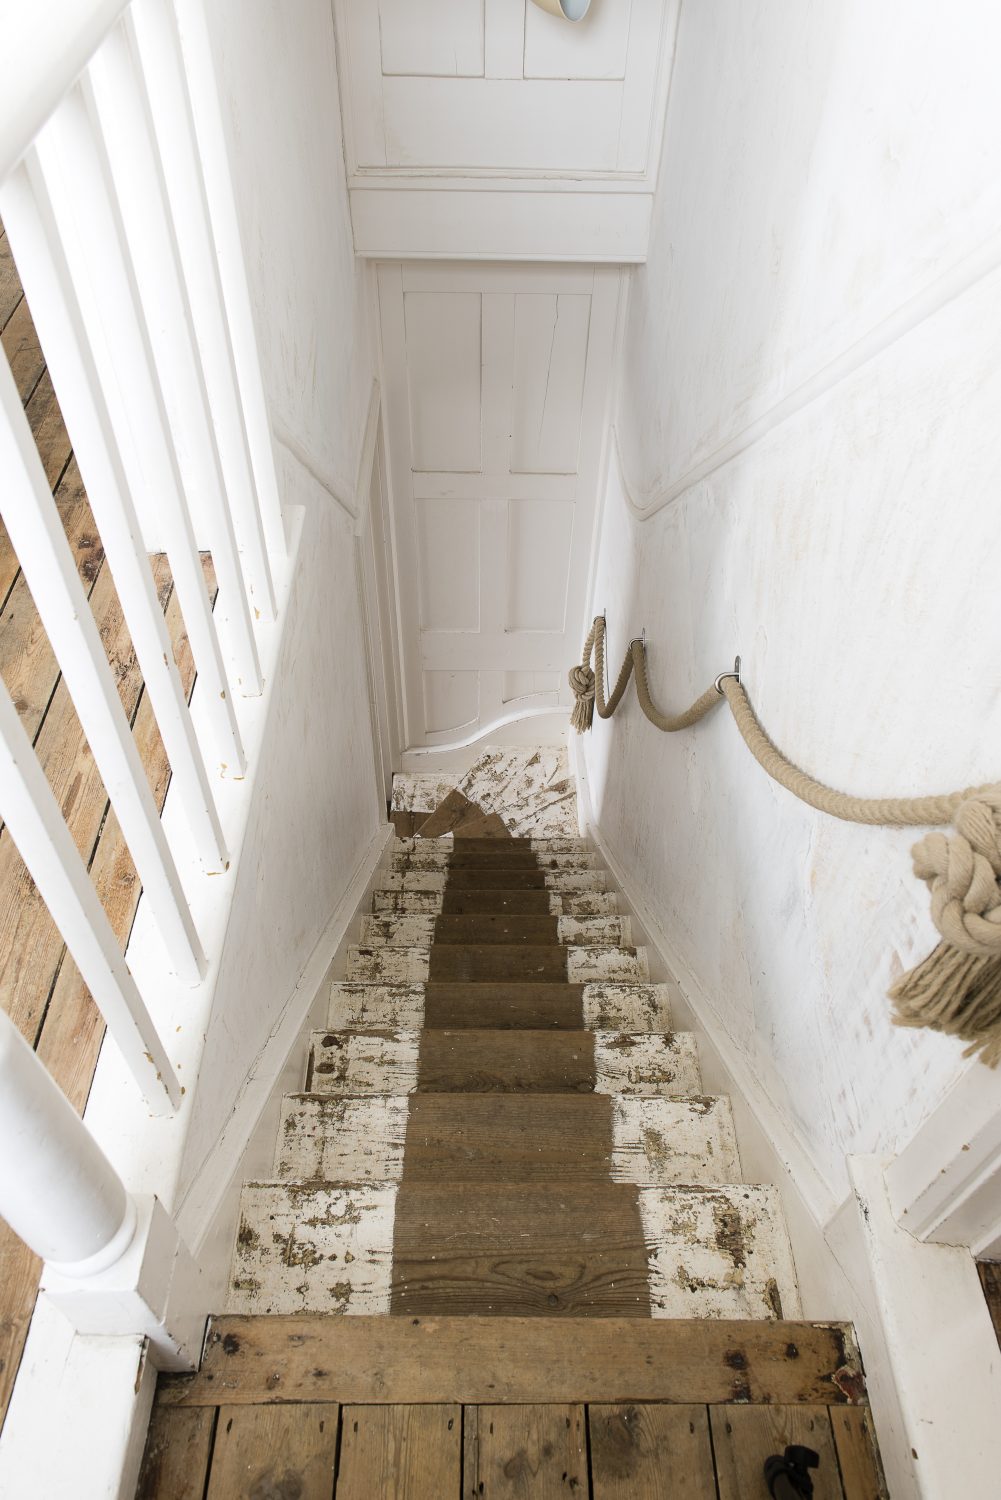 The staircase from the ground floor up to the first floor. The rope handrail is a subtle nod to the maritime connection of the cottage